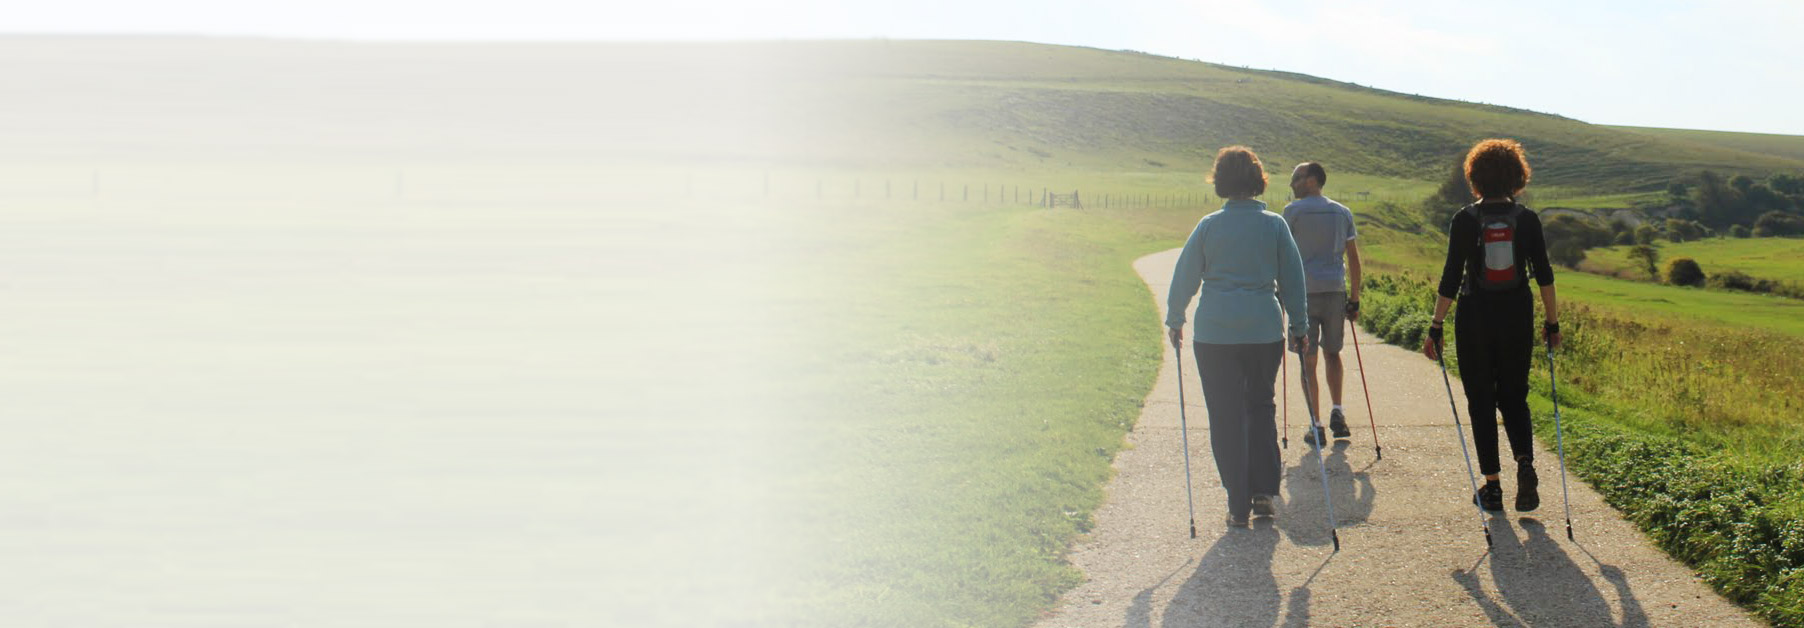 Nordic Walking for Health, South East England